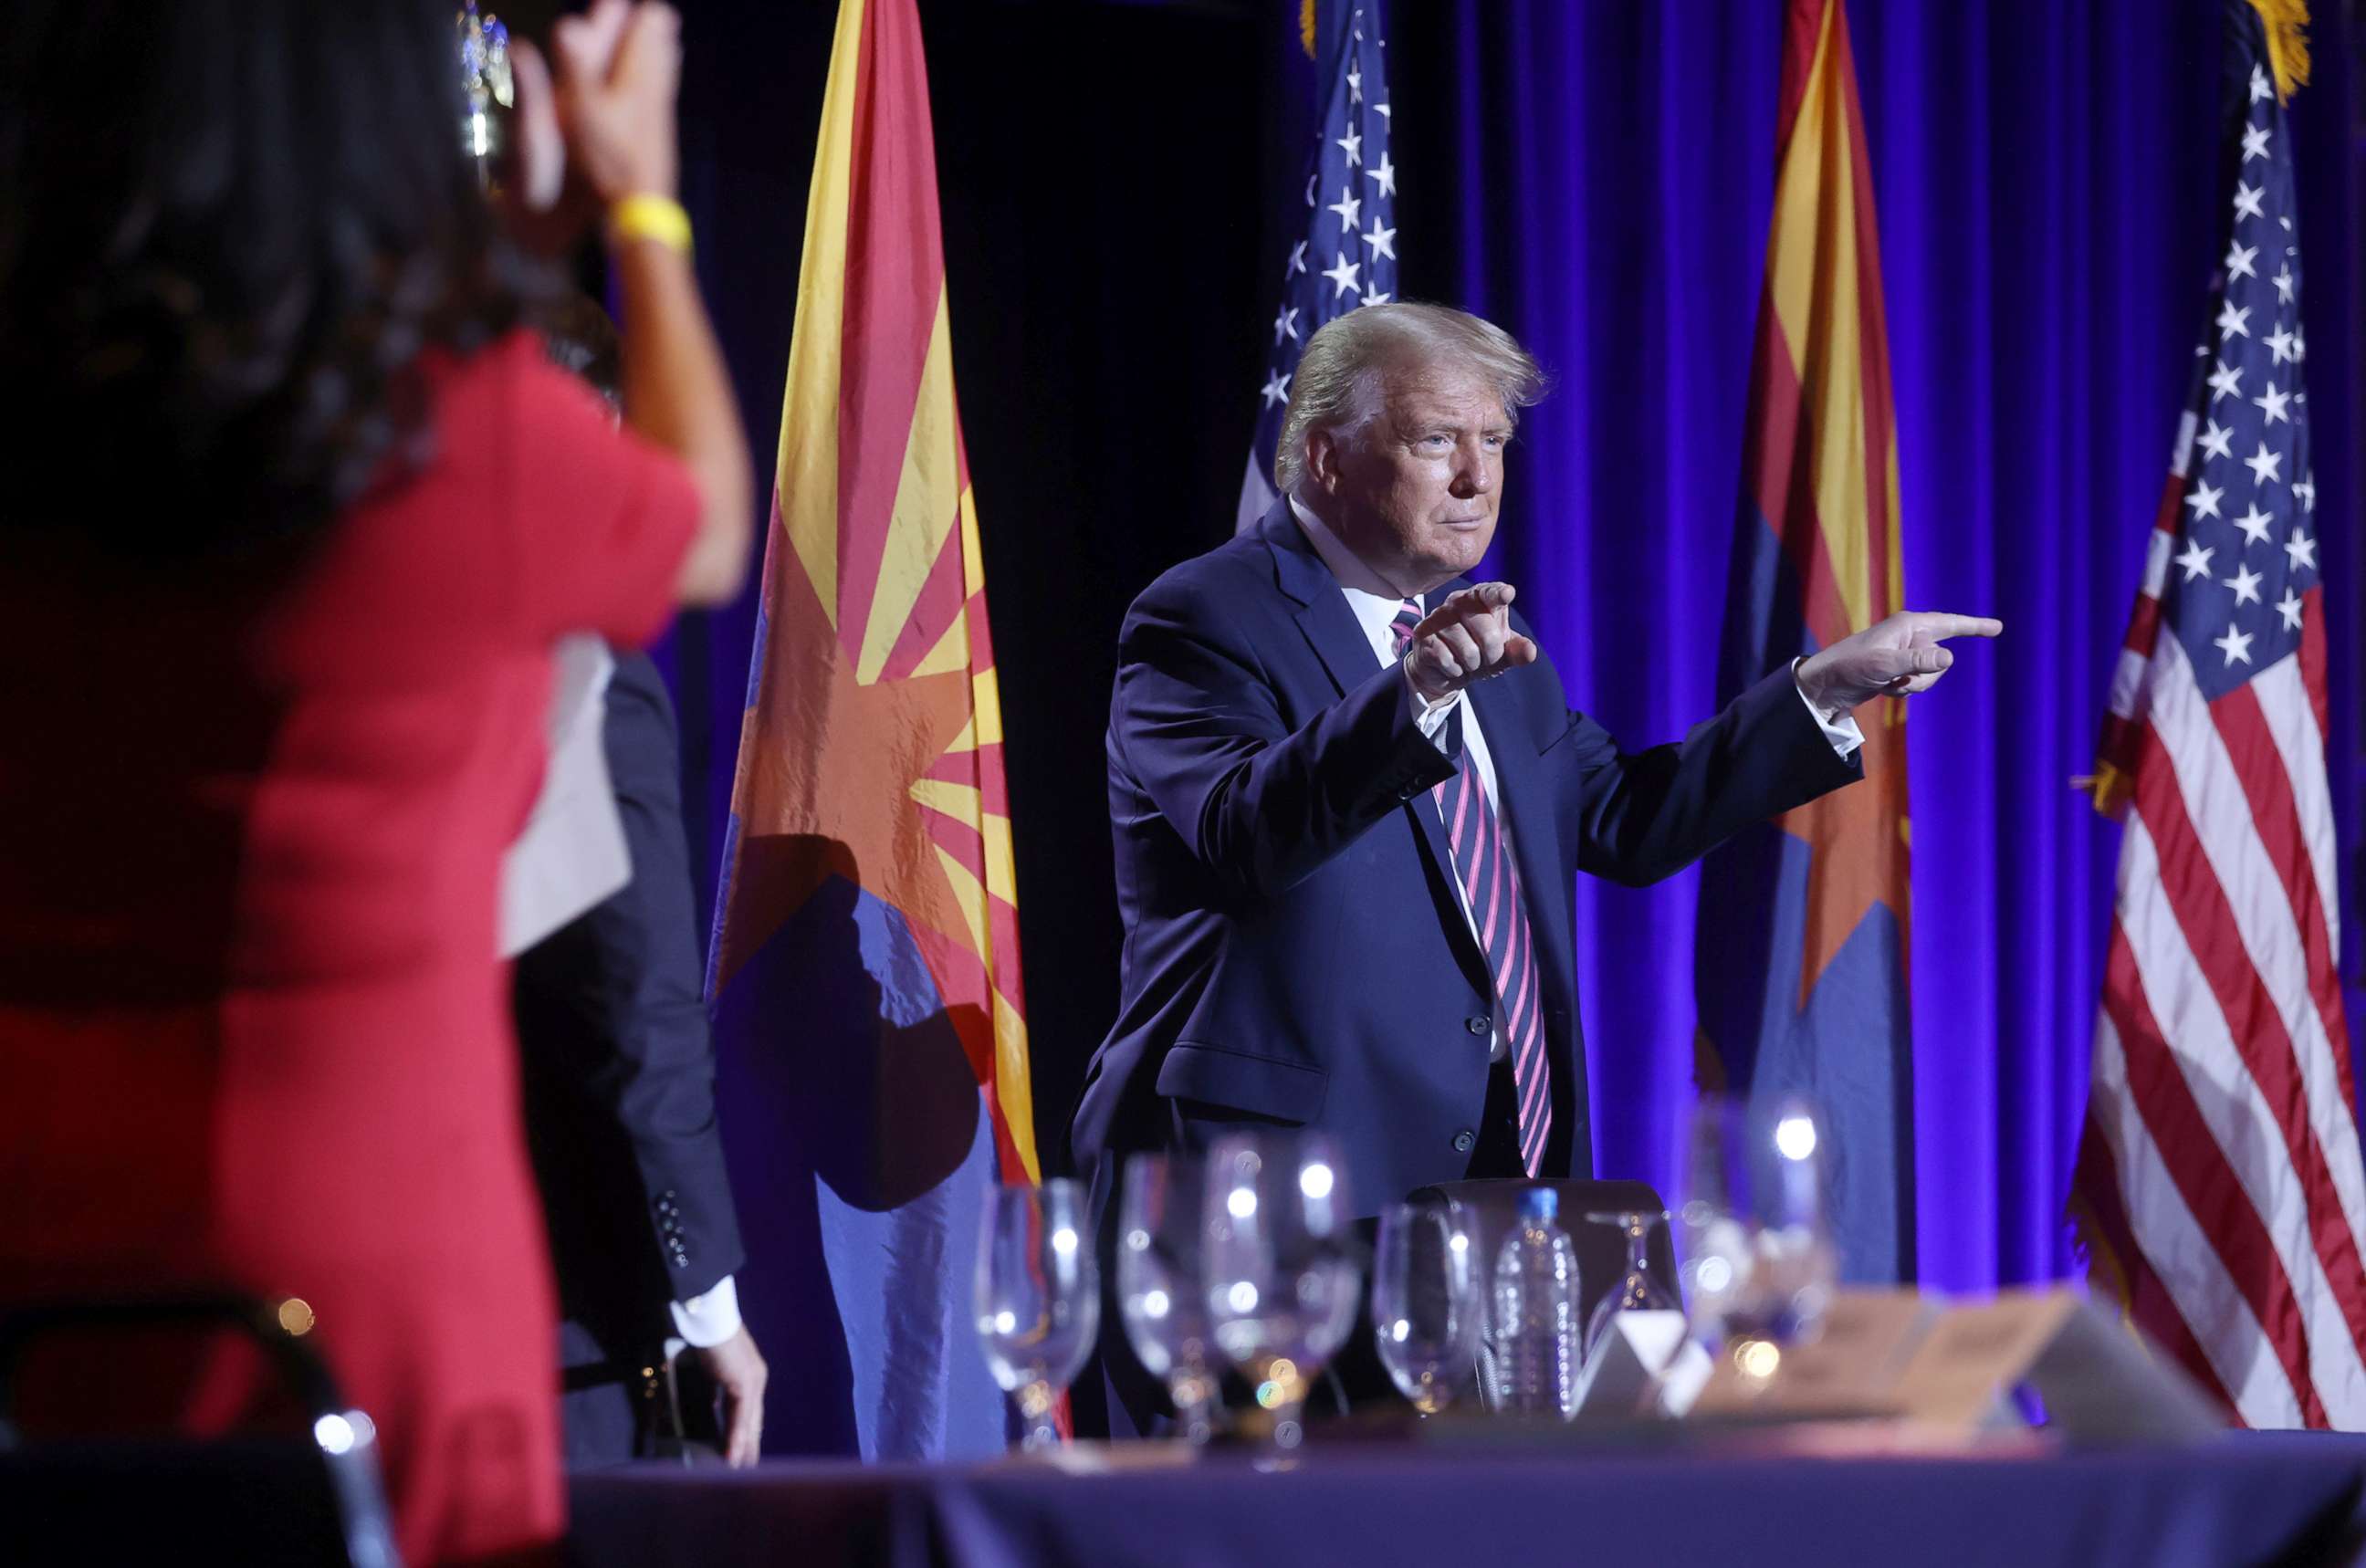 PHOTO: President Donald Trump gestures during a campaign event at the Arizona Grand Resort and Spa in Phoenix, Ariz., Sept. 14, 2020.